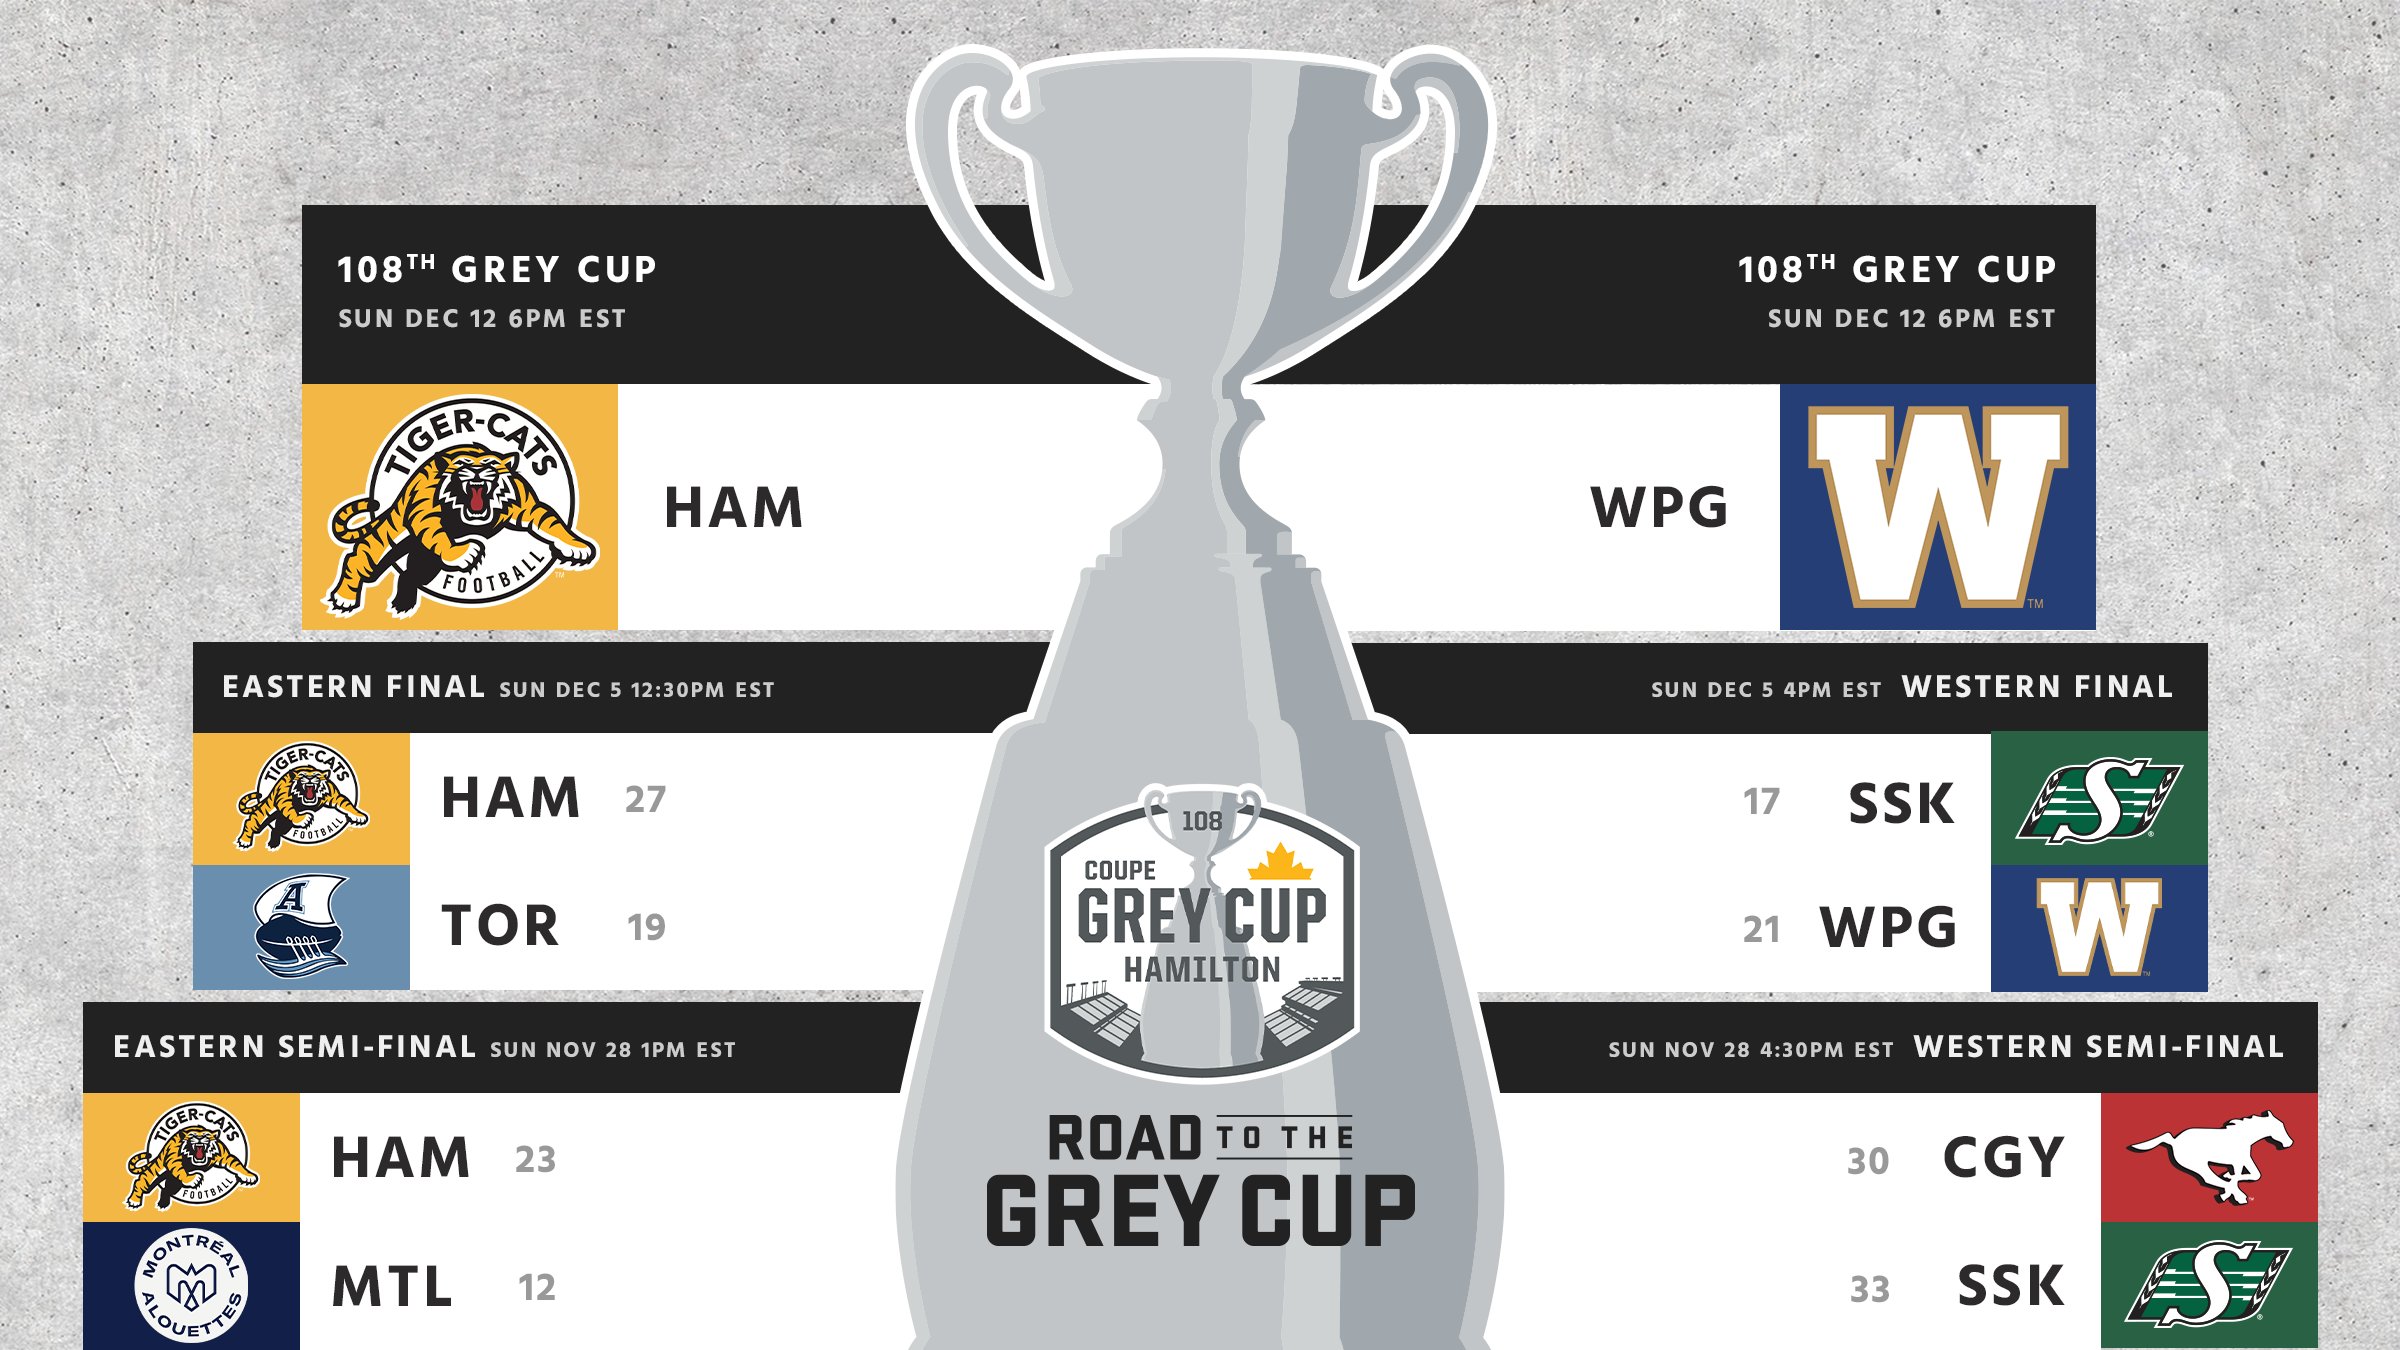 Road to the 108th Grey Cup